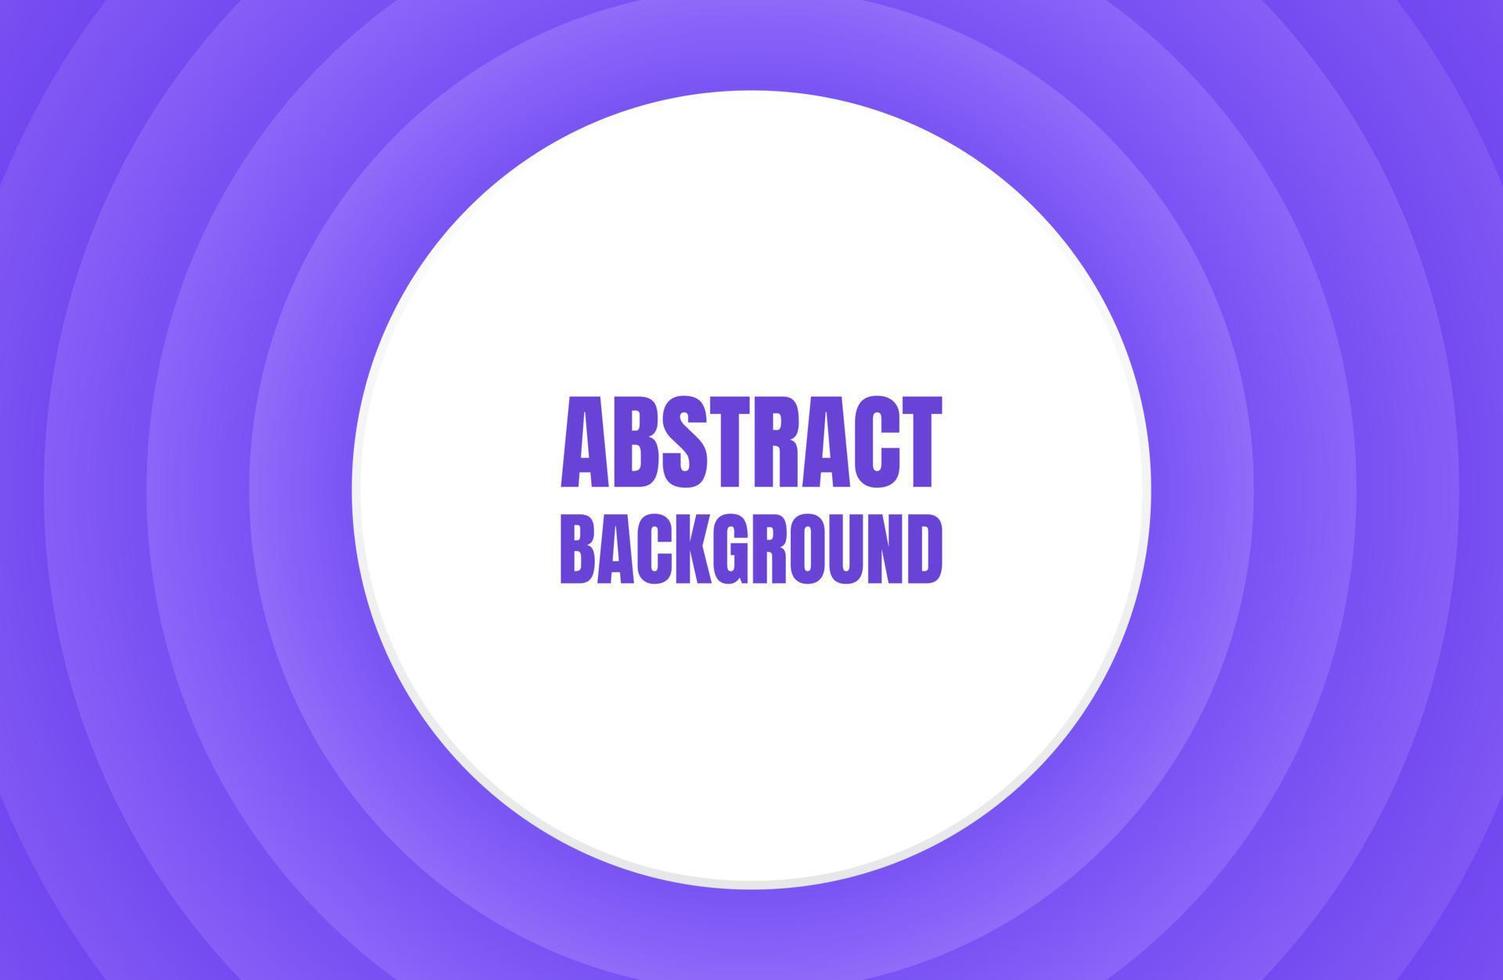 Abstract Purple Gradient Circle Background. Backdrop Template with Copy Space for Banner, Advertising, and Web Design Concepts. Simple, Modern, and Trendy Wallpaper. Free Graphic Vector Illustration.